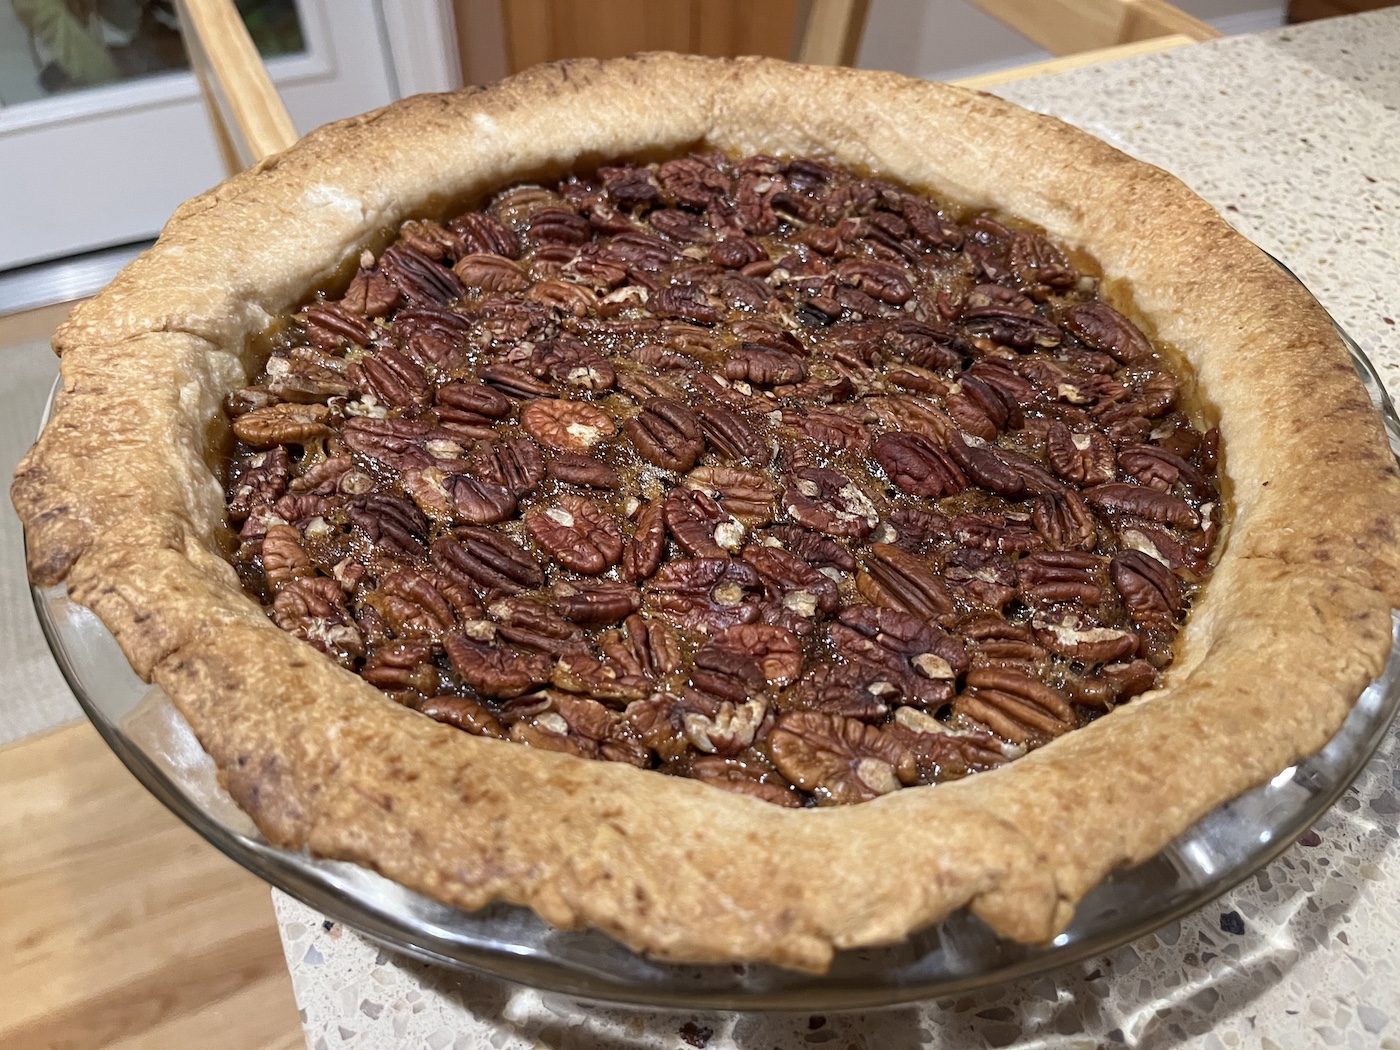 Picture of a delicious looking pecan pie